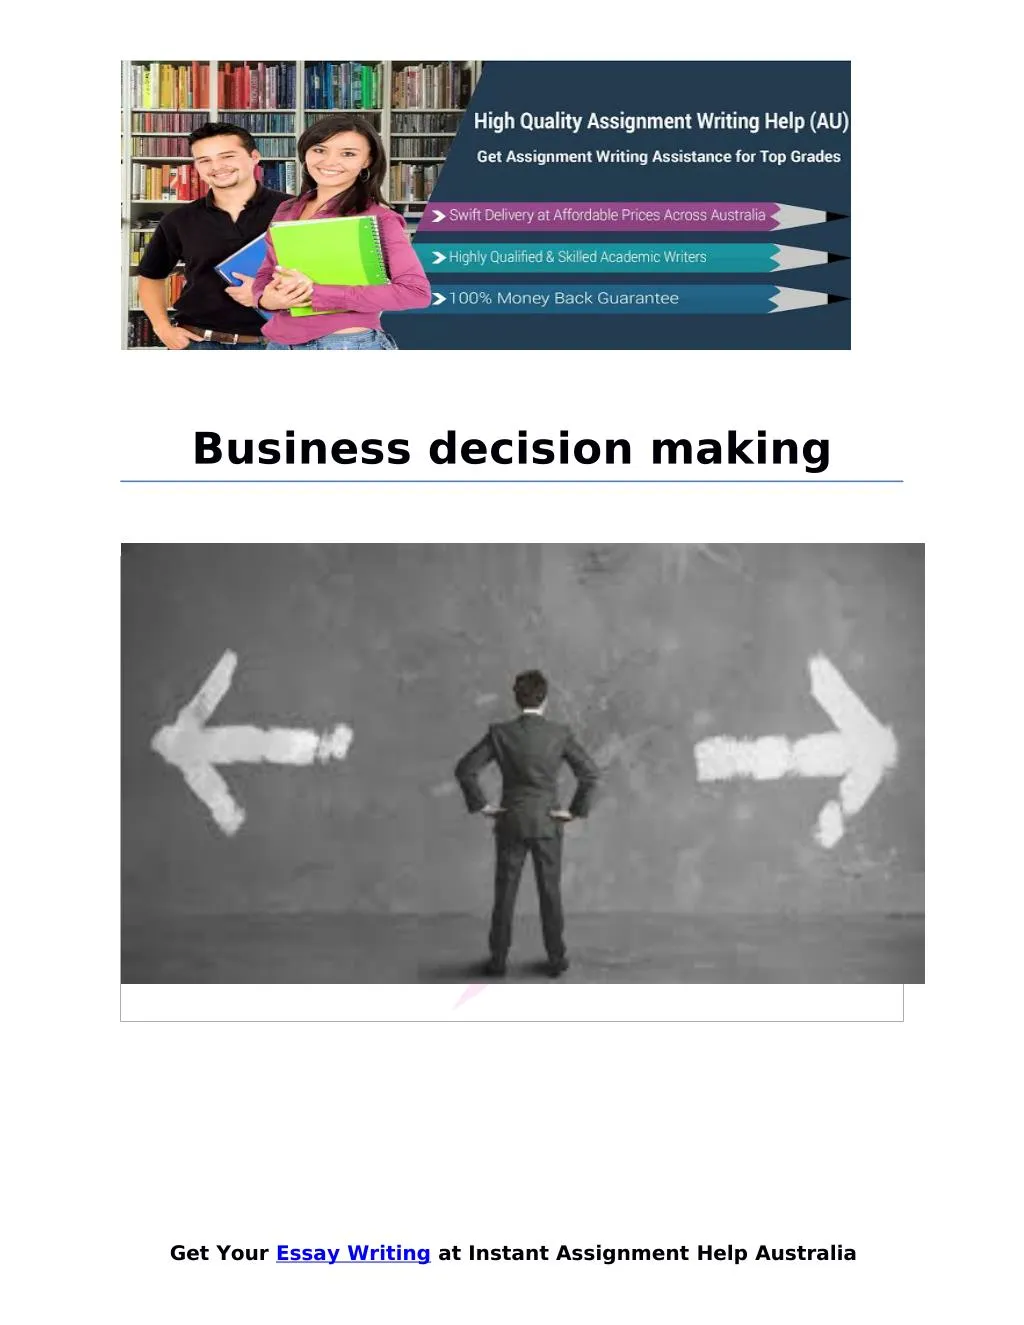 business decision making